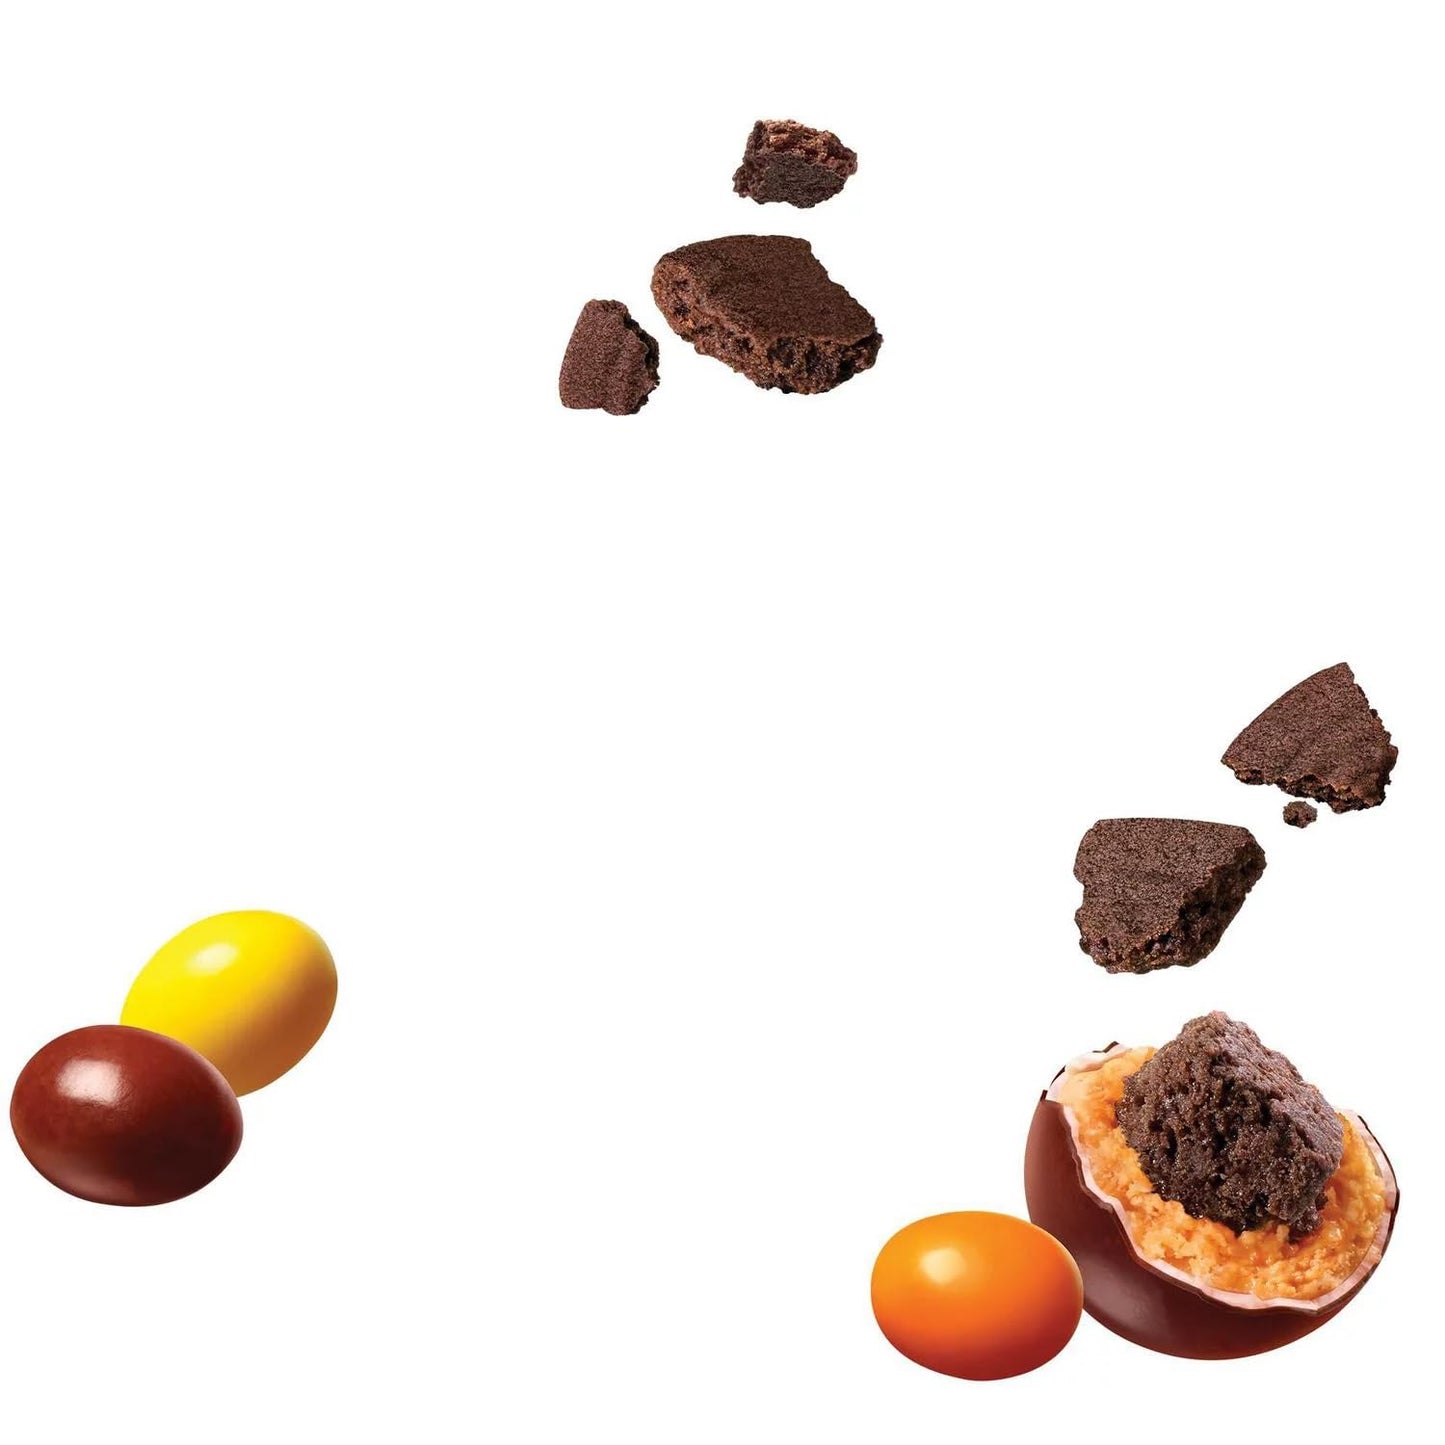 Reeses Pieces with Chocolate Cookie Candy 170g/6oz (Shipped from Canada)